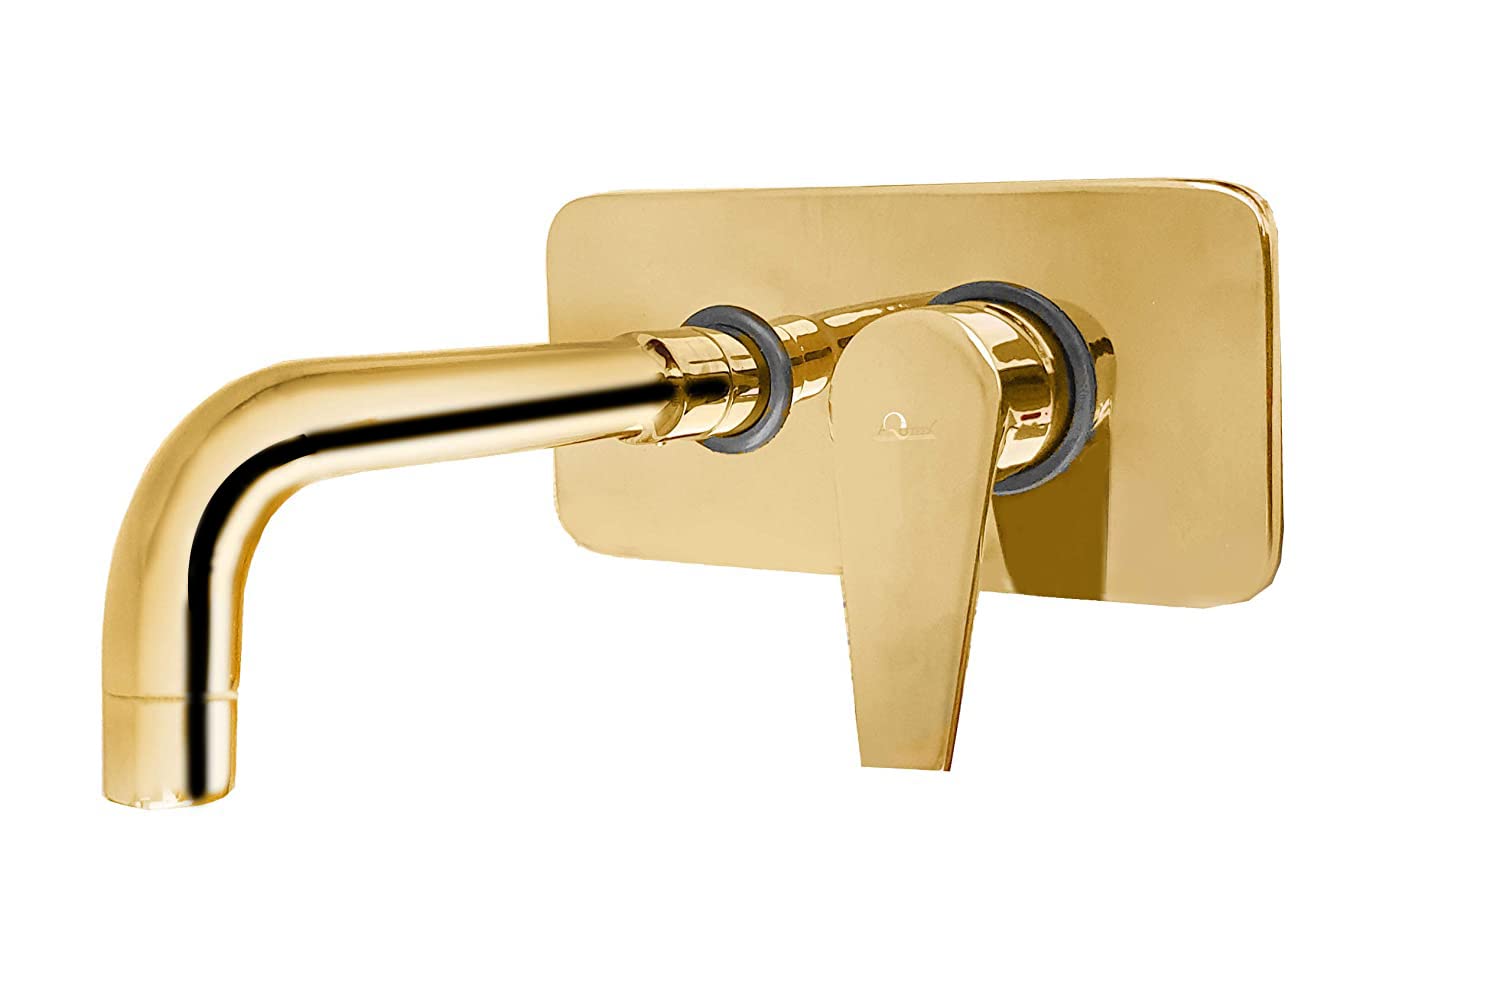 Aquieen Luxury Series Wall Mounted Basin Tap Mixer with Provision for Hot & Cold Water (Entice - Gold)